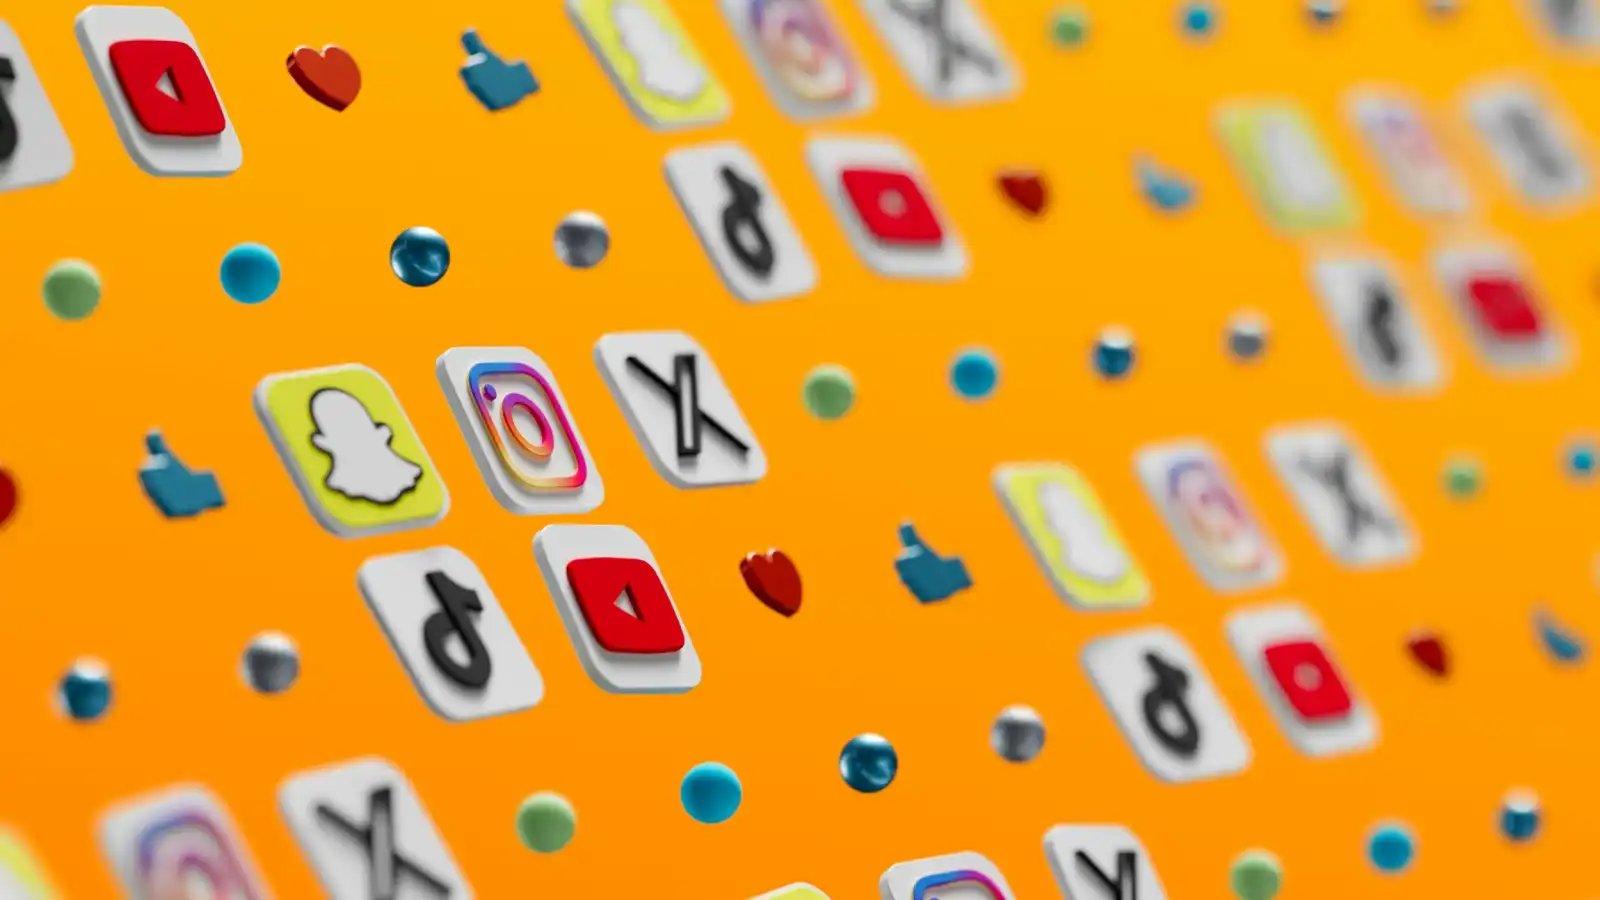 Photo of social media icons and iconography by Igor Omilaev on Unsplash